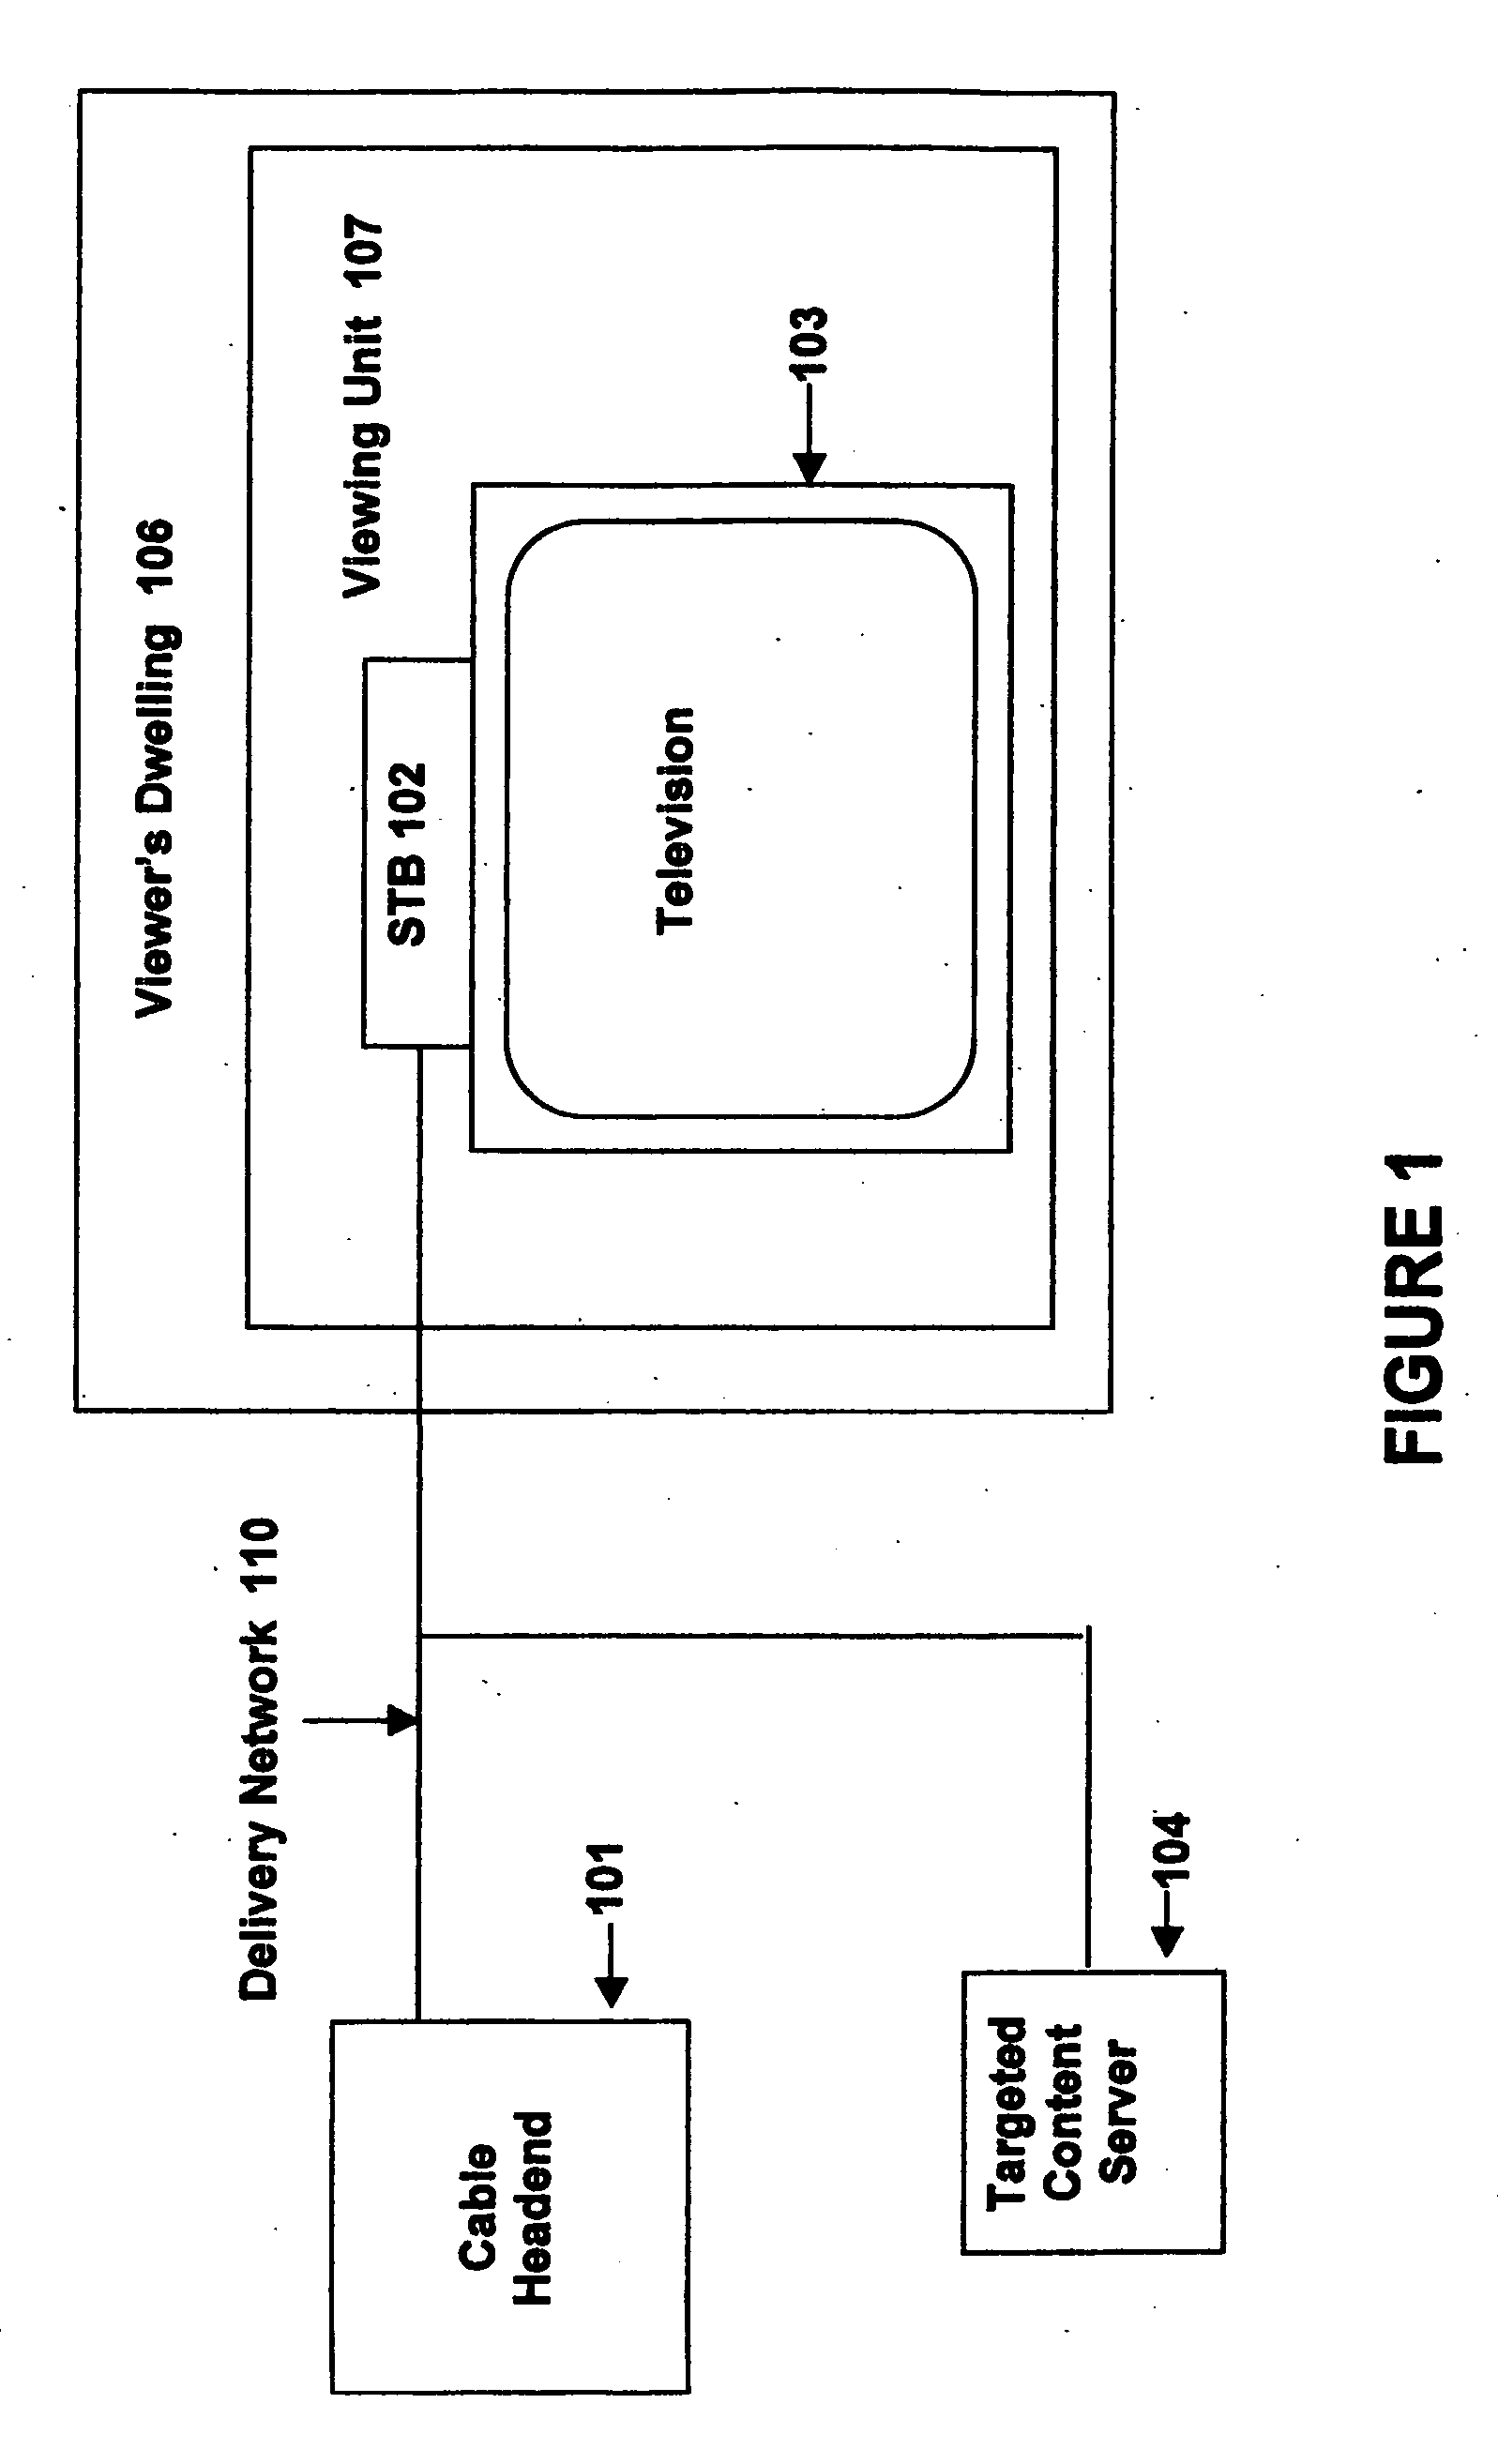 Targeted content delivery system in an interactive television network